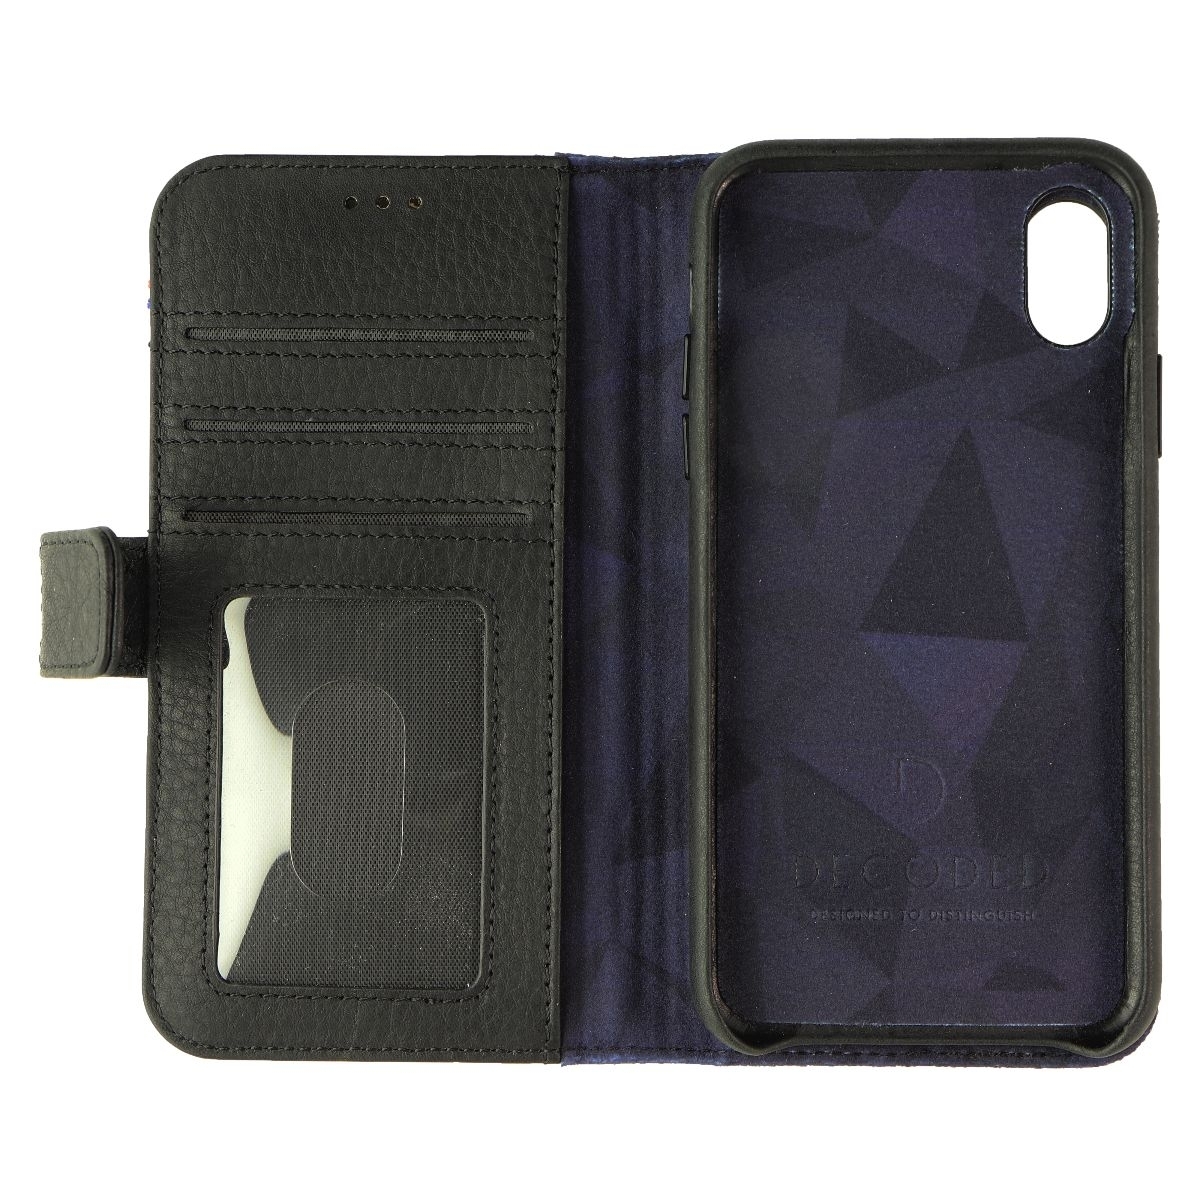 DECODED Full Grain Leather 2-in-1 Wallet For IPhone Xs/X - Rough Black (Refurbished)